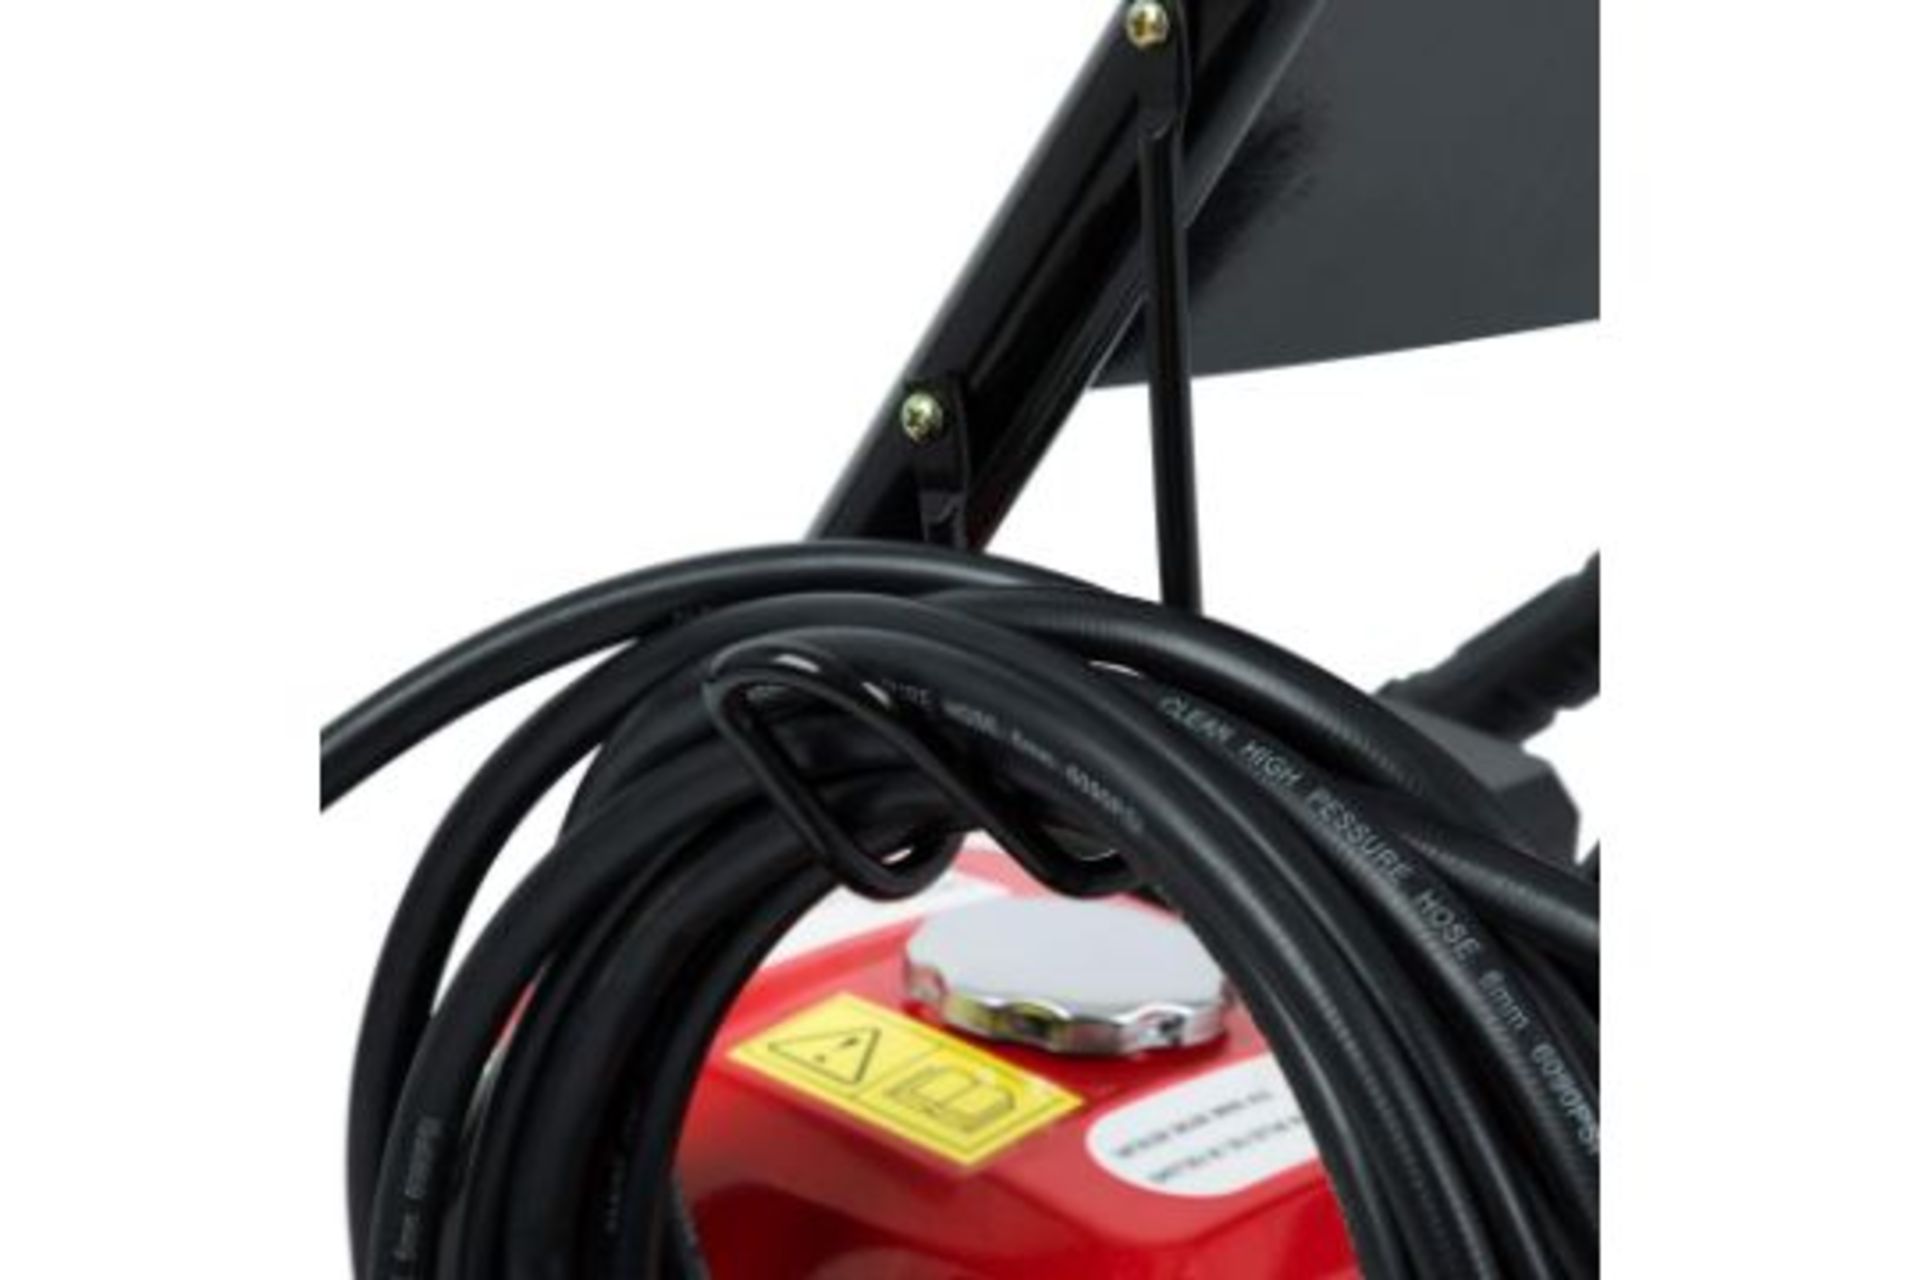 New & Boxed EBERTH Petrol Pressure Washer, Self-Priming, 210 Bar Working Pressure, 5 Nozzles and - Image 6 of 8